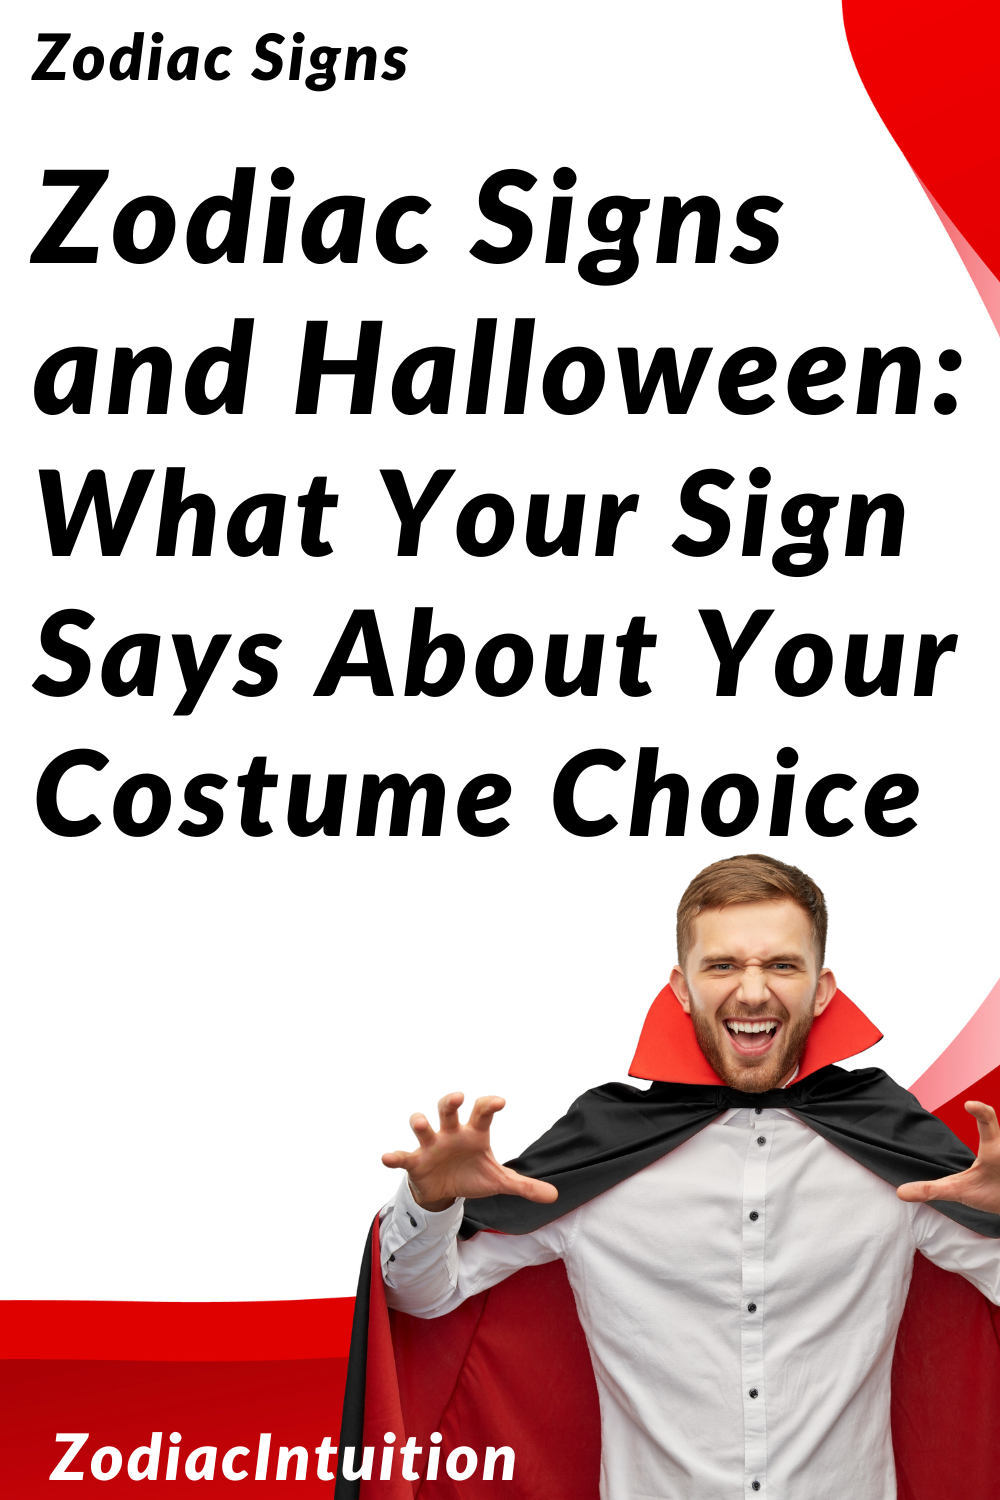 Zodiac Signs and Halloween: What Your Sign Says About Your Costume Choice